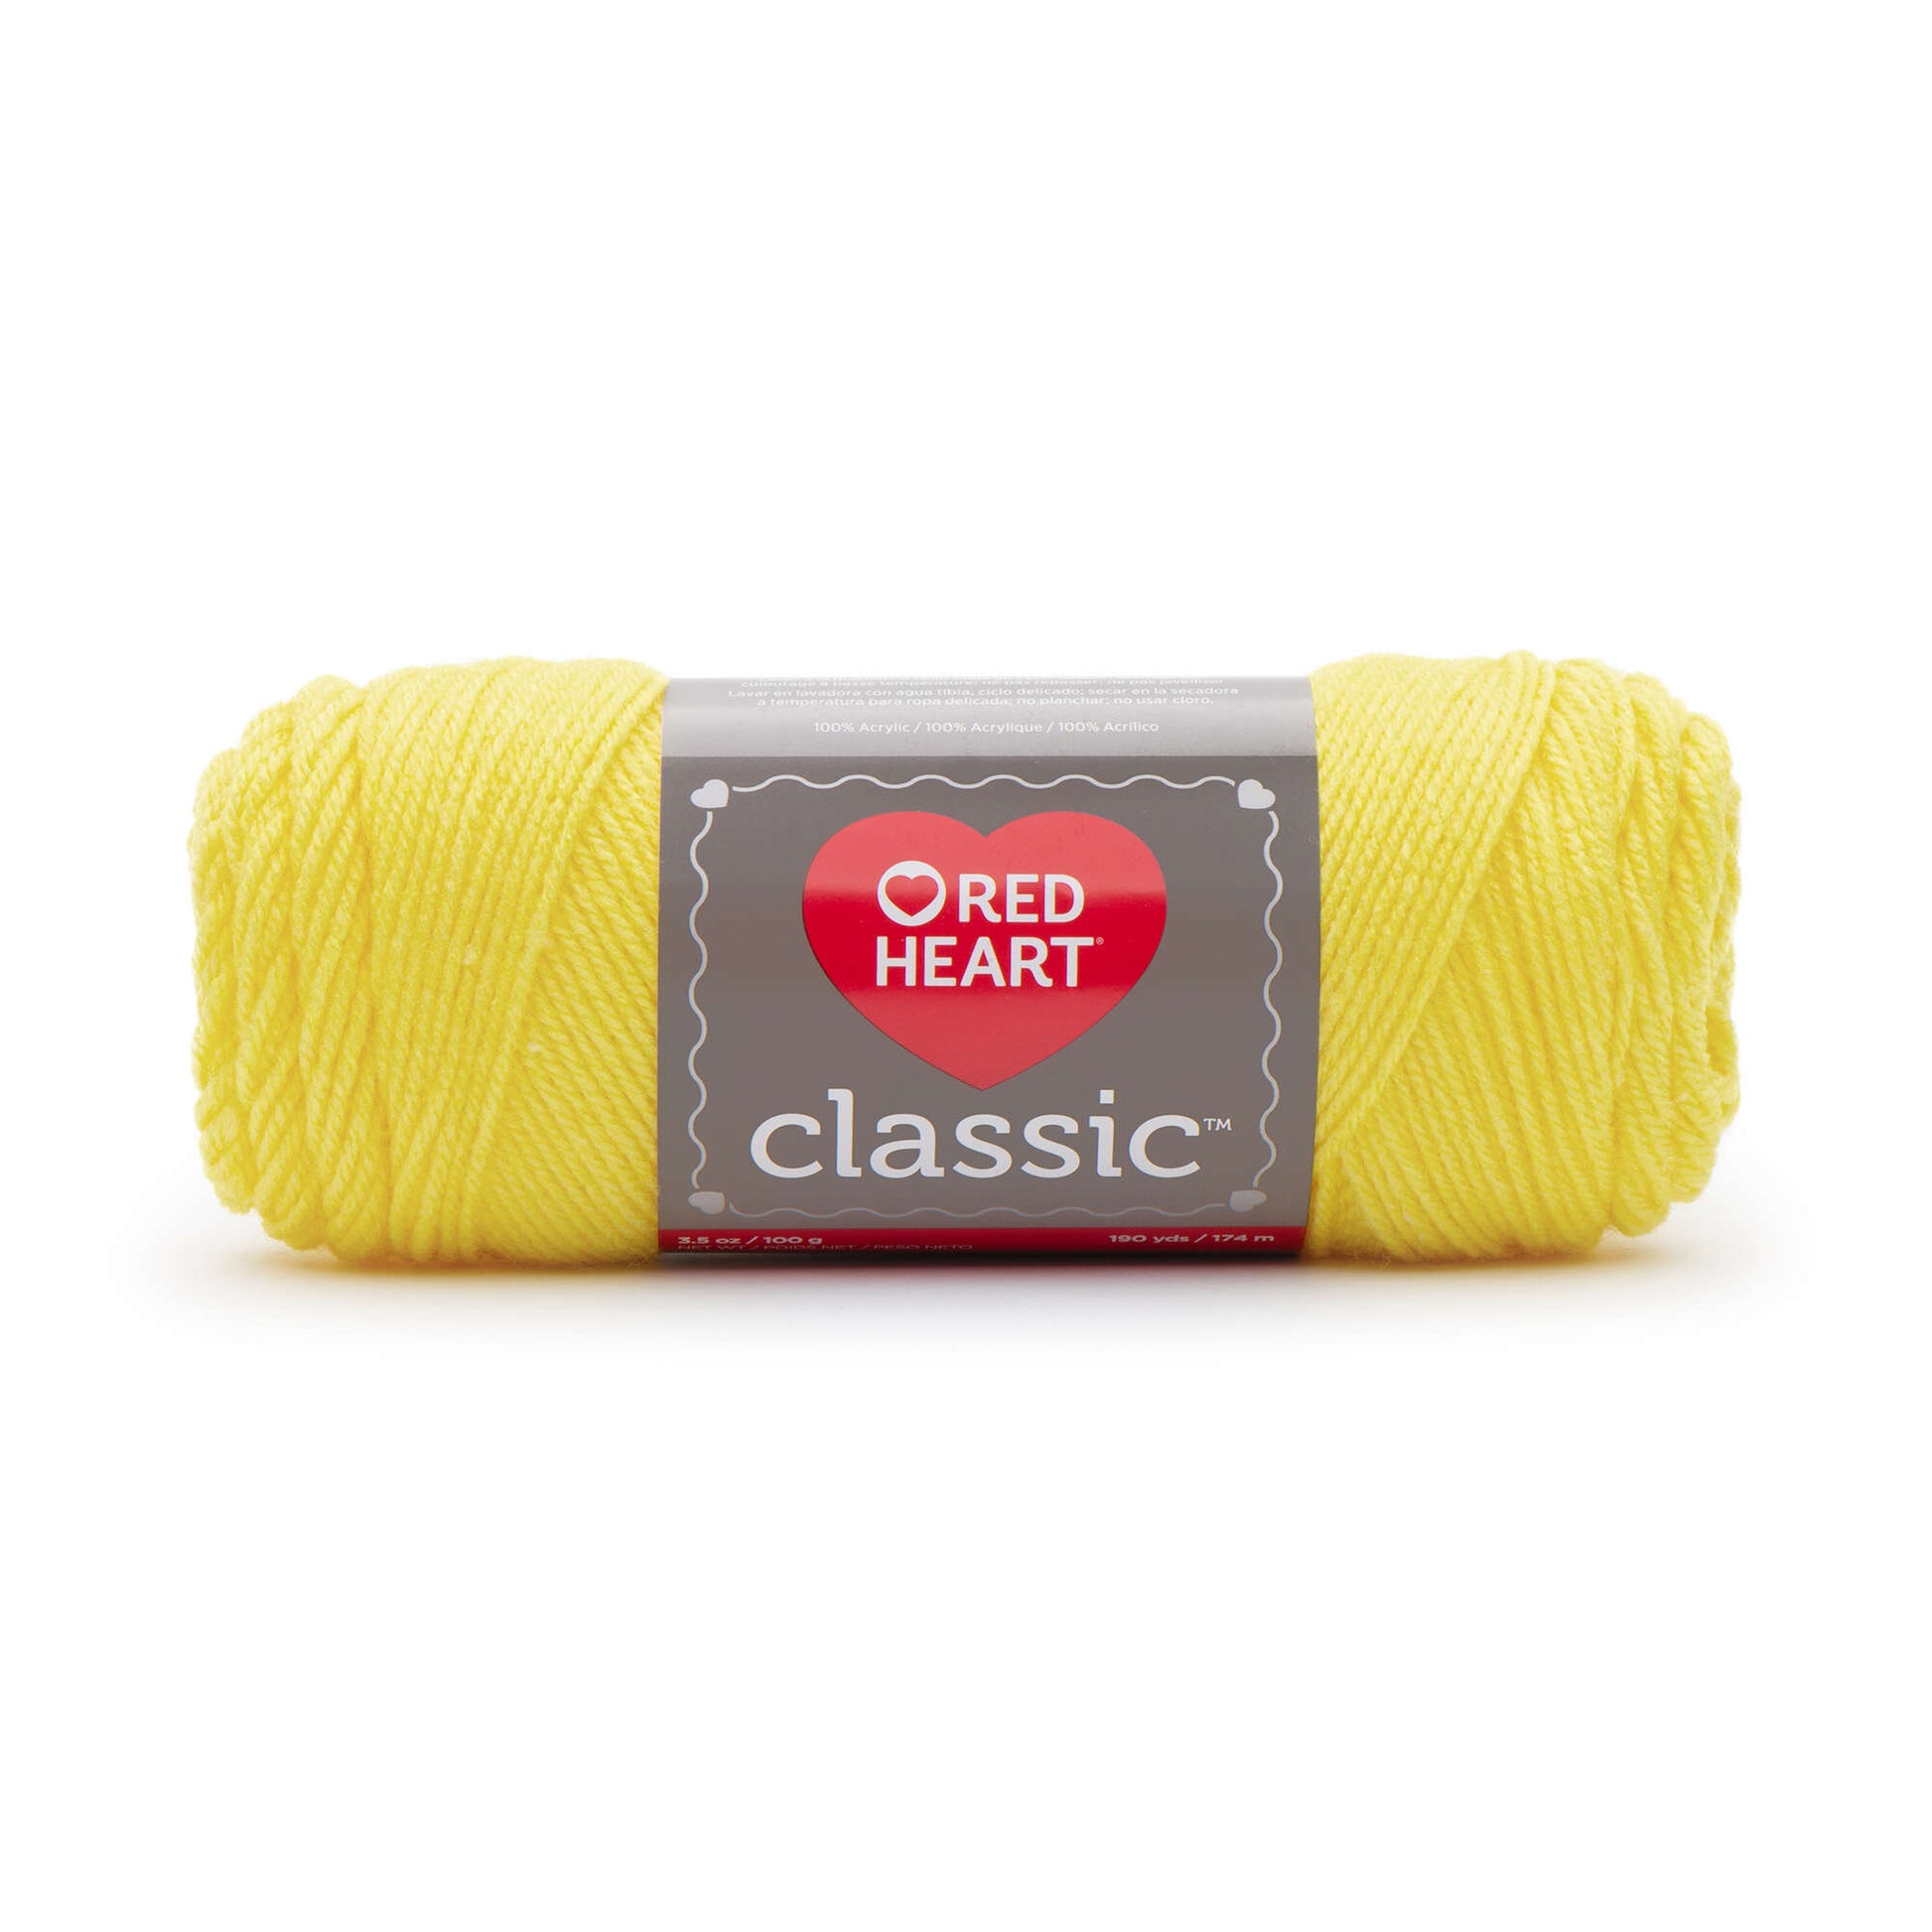 Red Heart Classic Yarn - Clearance shades Yellow